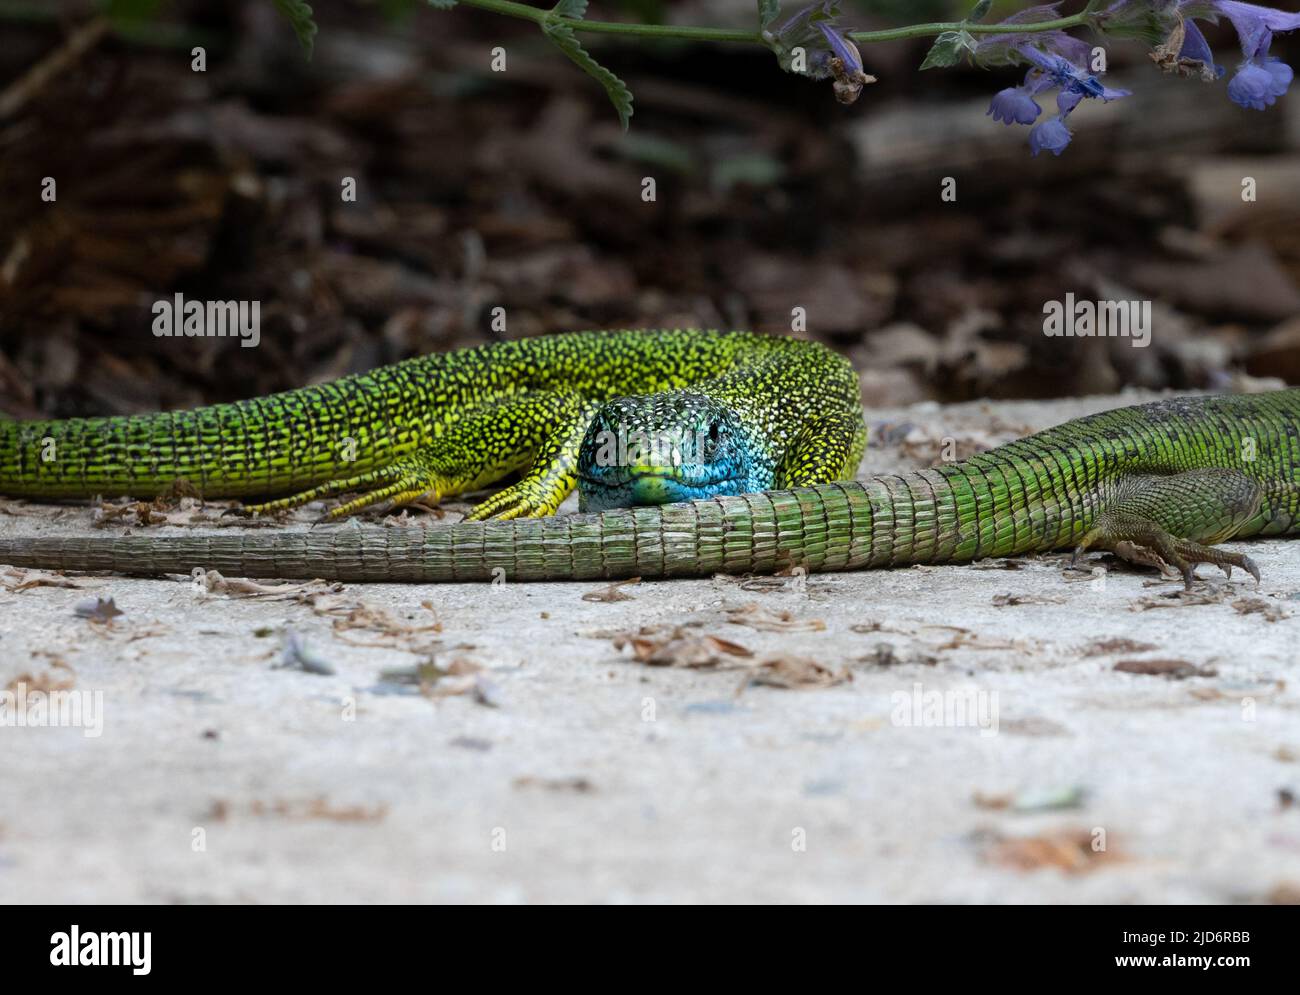 Close-up of a male and female green lizard couple (Lacerta bilineata or Lacerta vivipara, Smaragdeidechse) on a stone. Focus on male lizard with its h Stock Photo